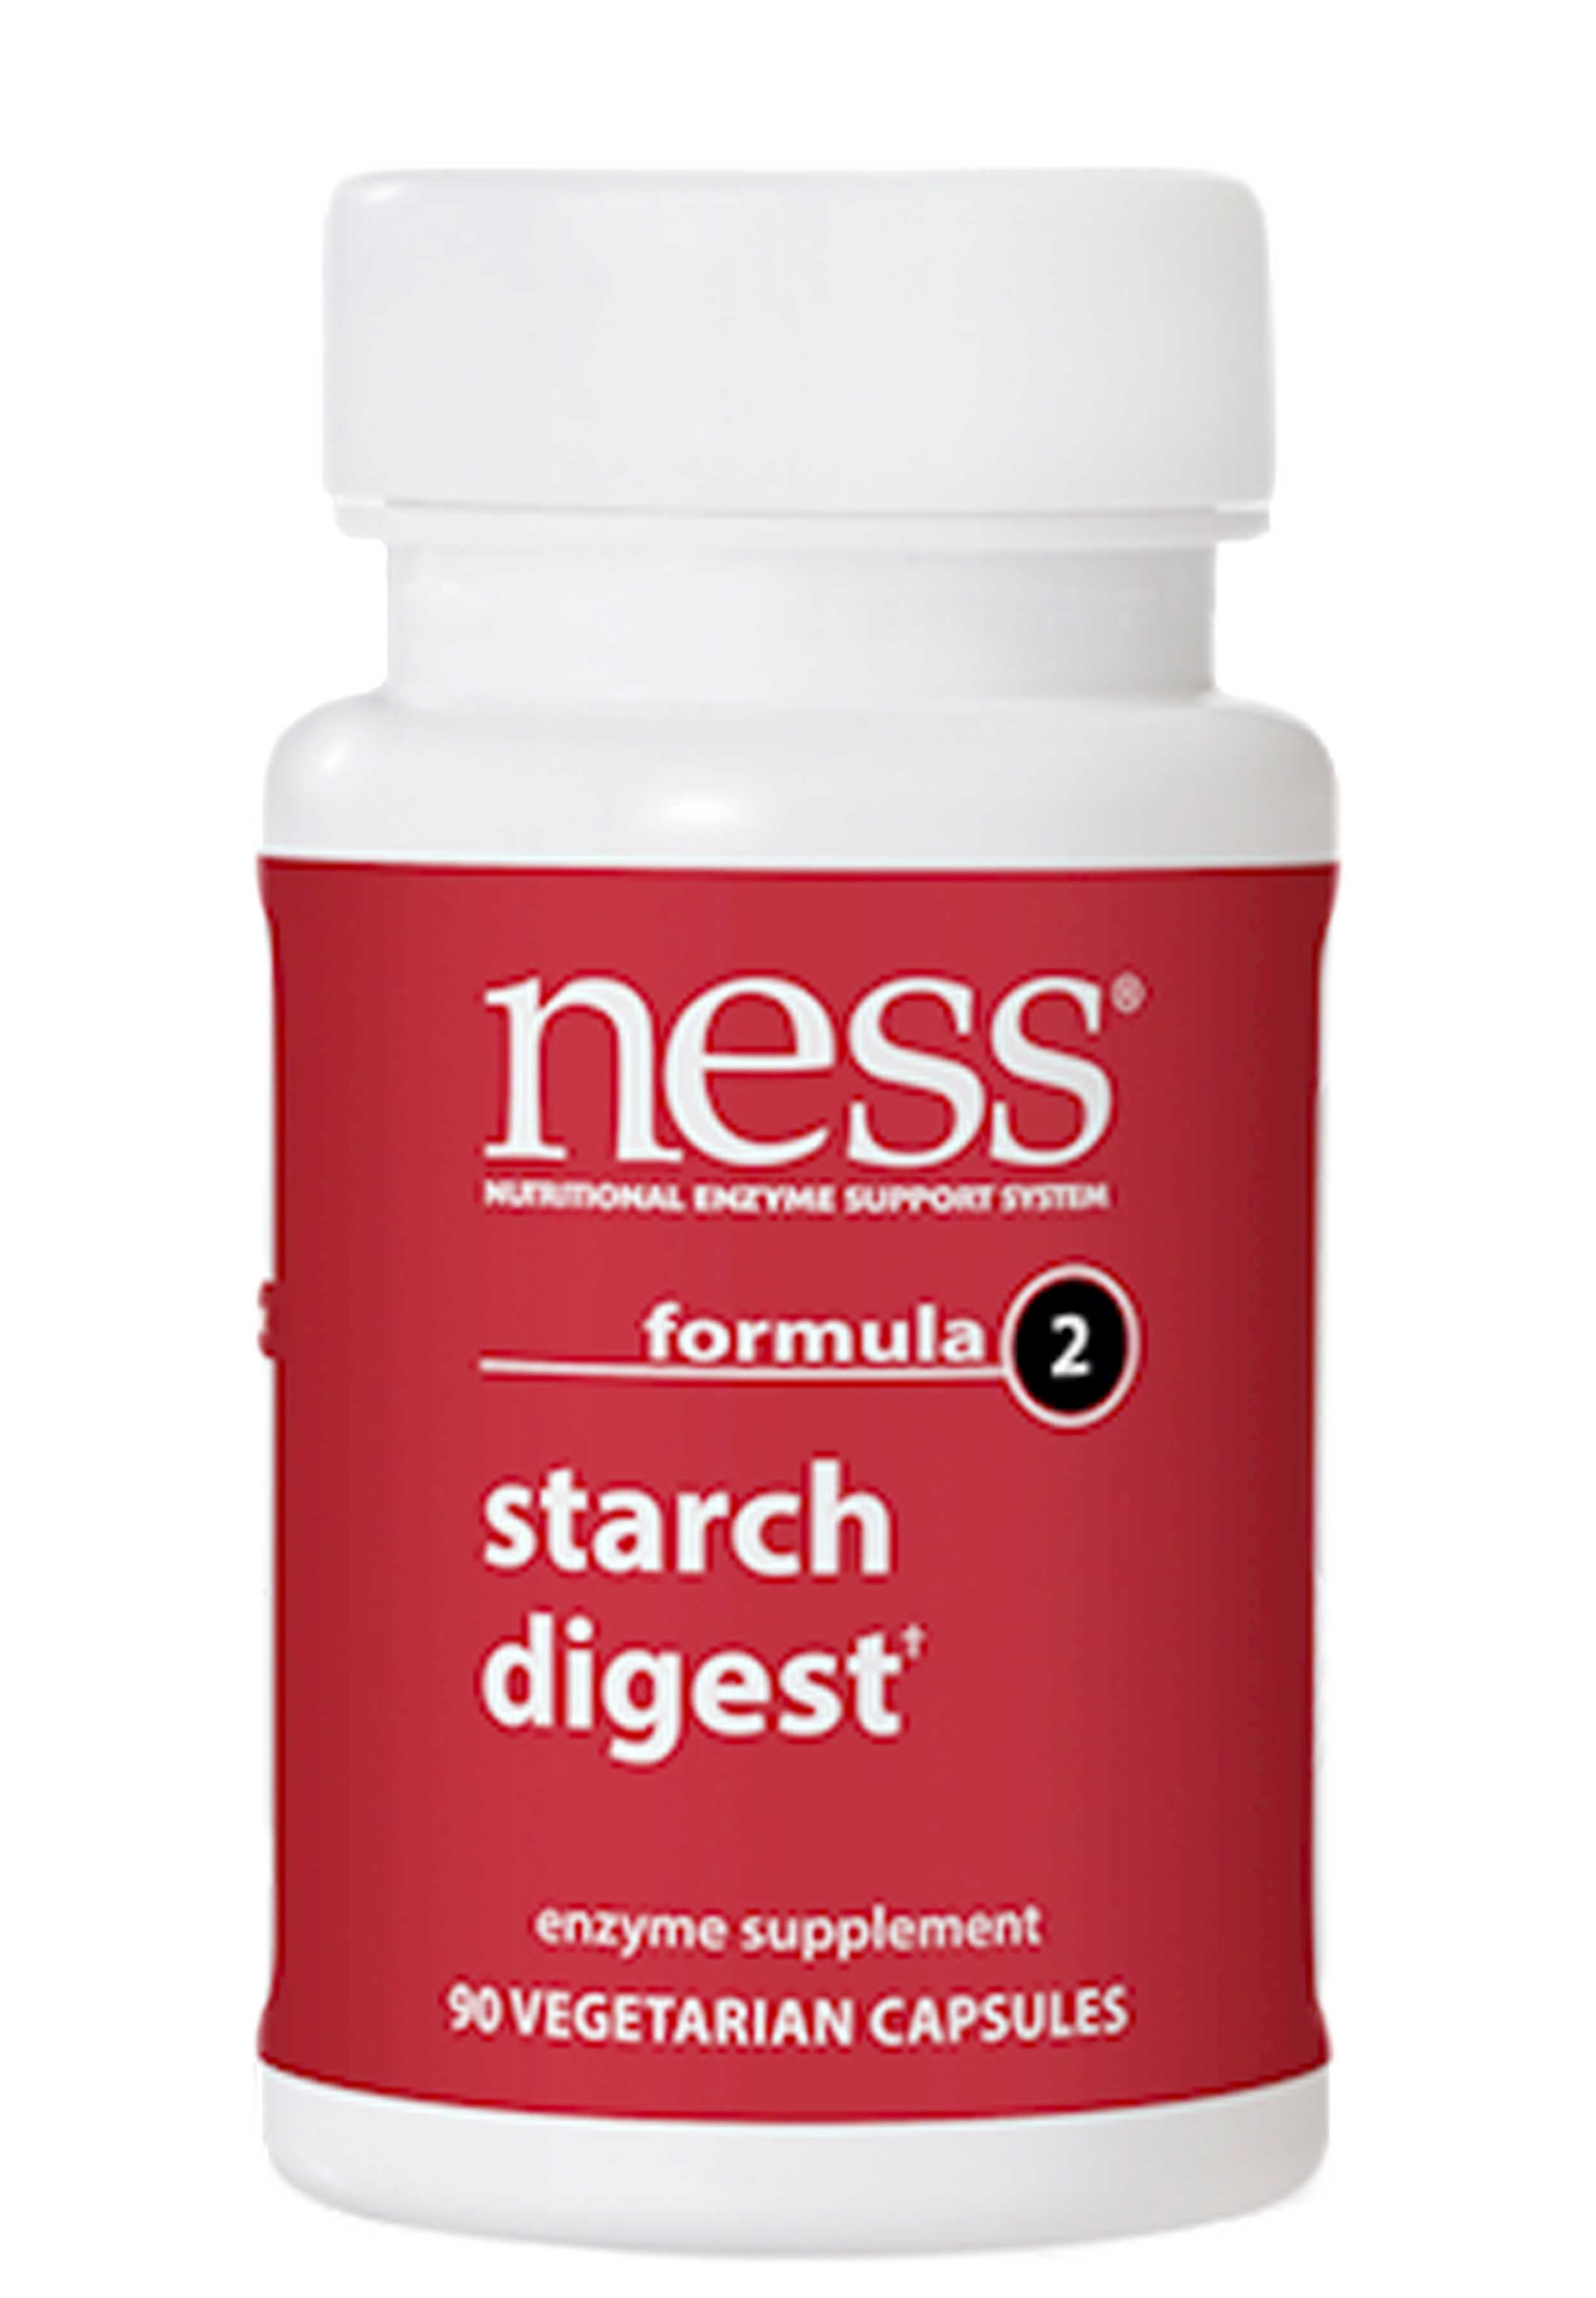 Ness Enzymes Starch Digest formula 2